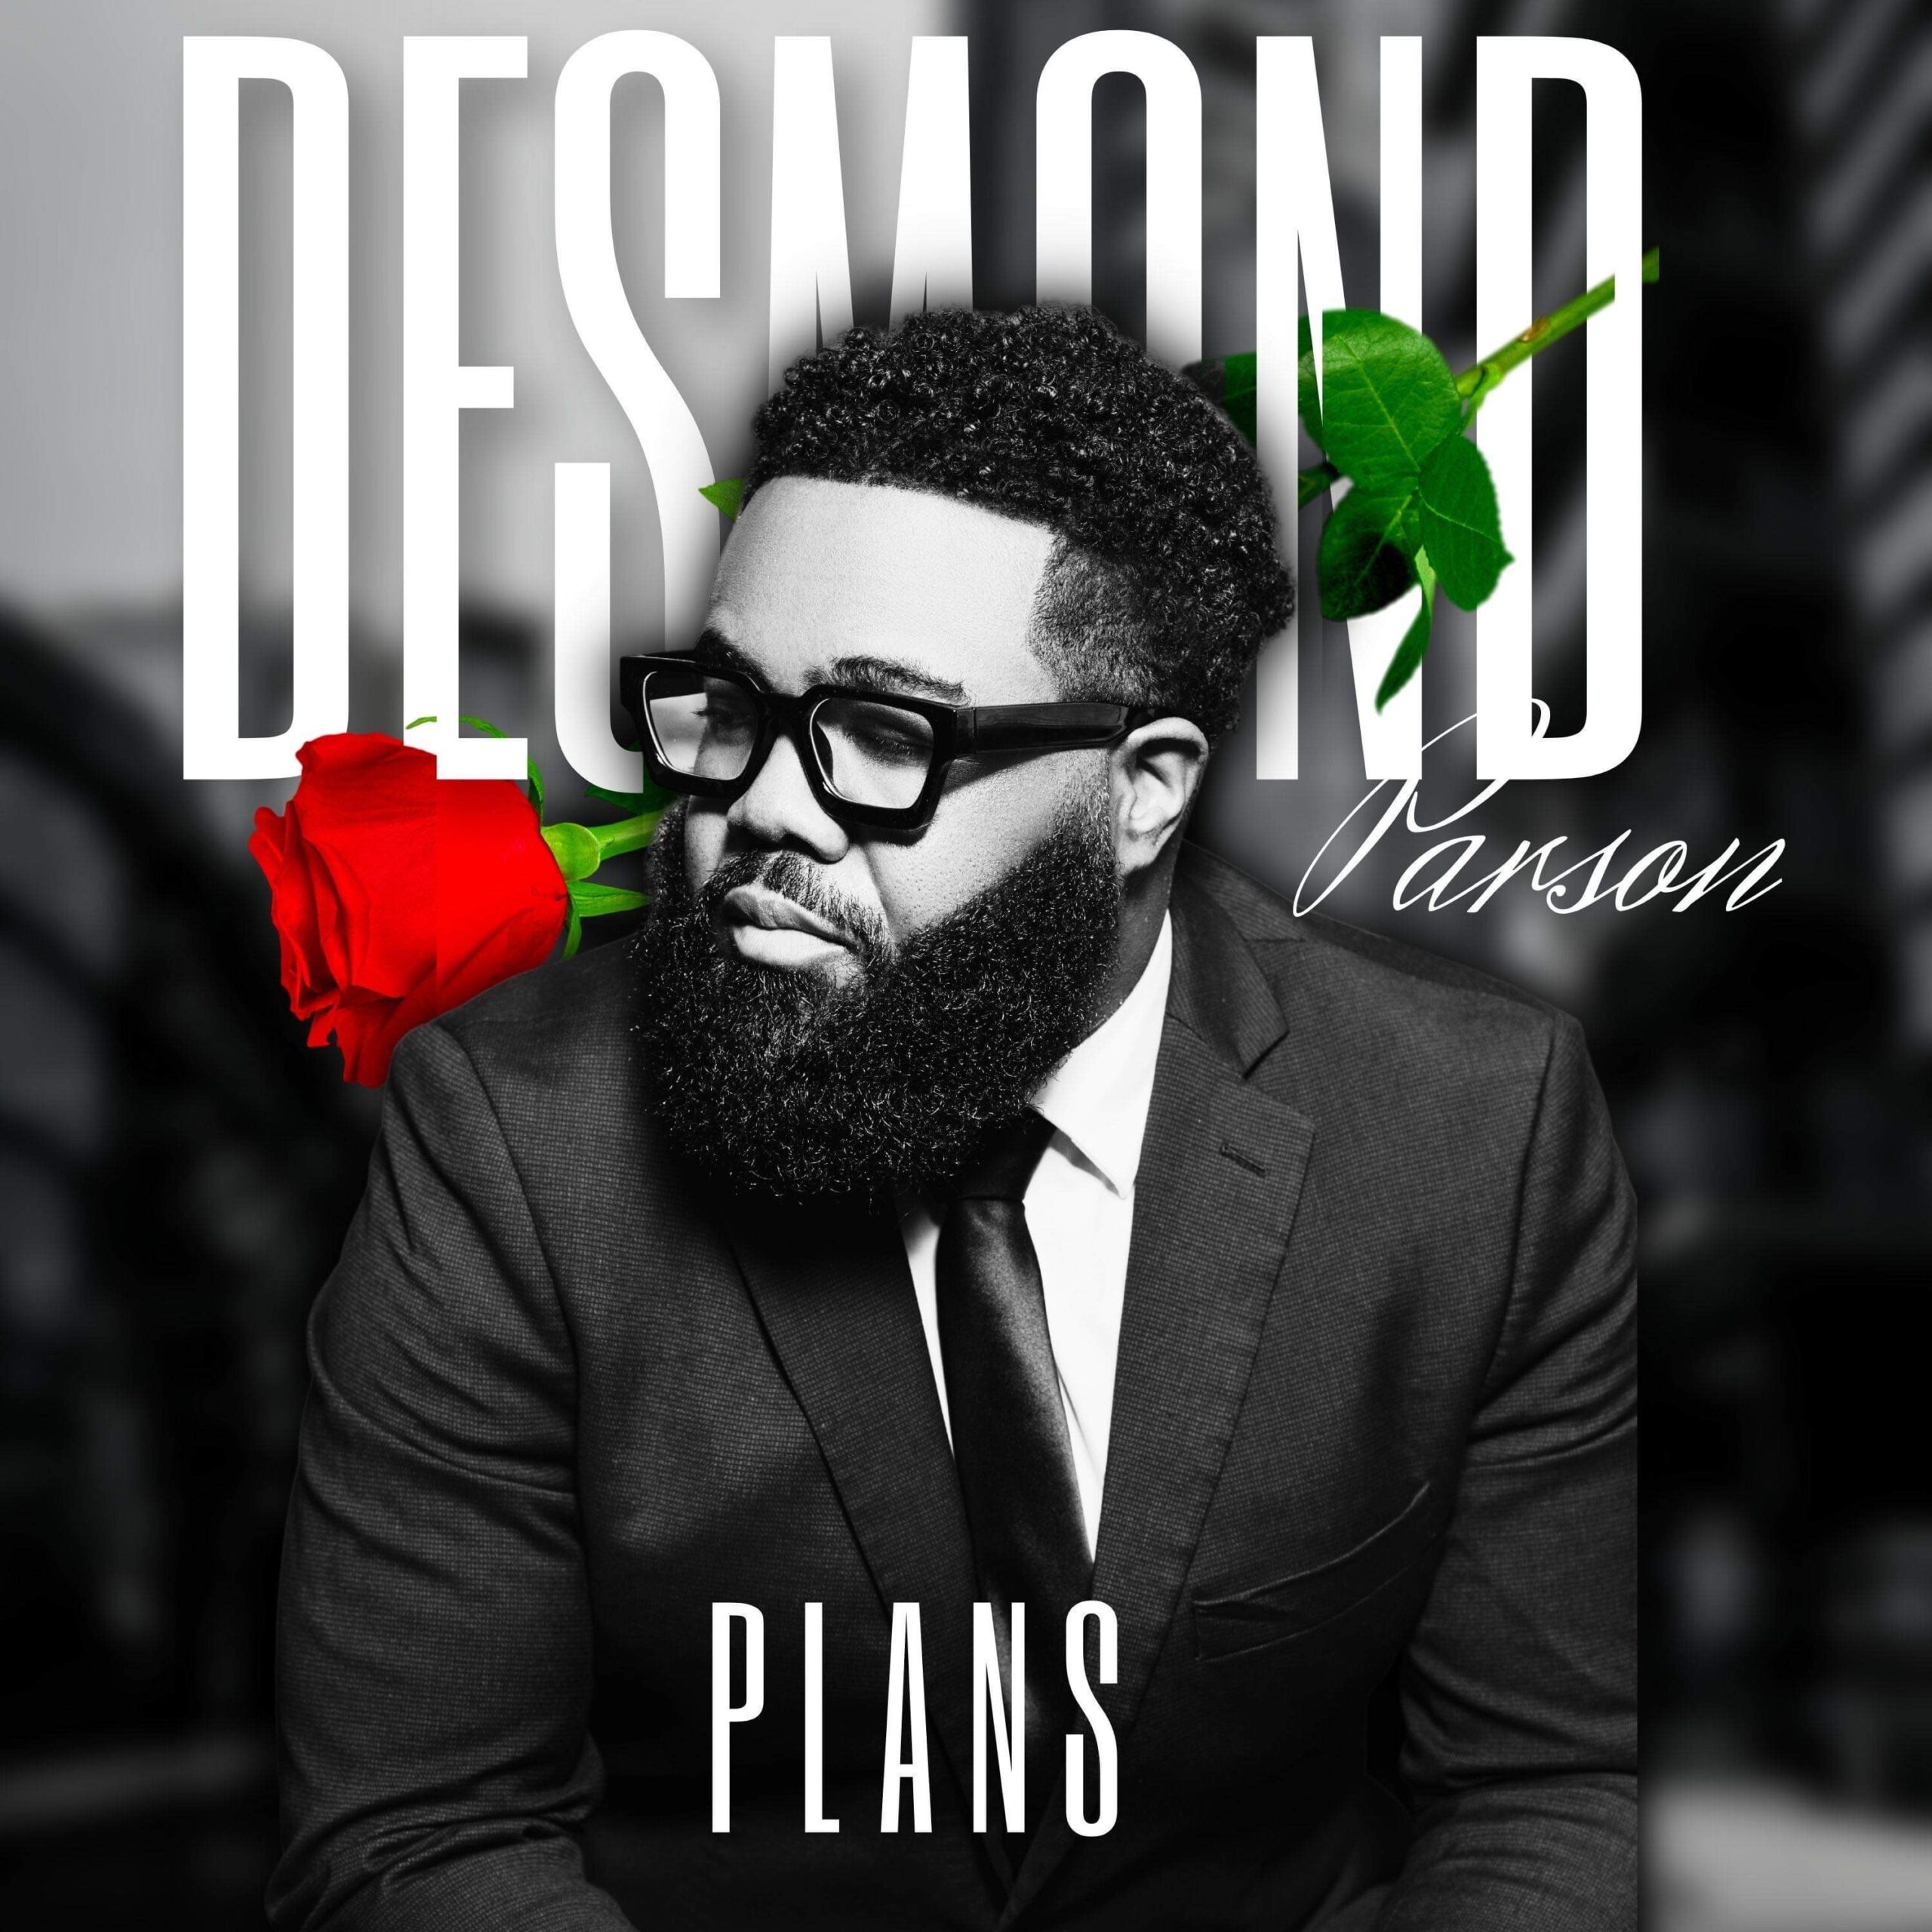 Desmond Parson’s “Plans”: Crafting a Funky Love Story for Eternity